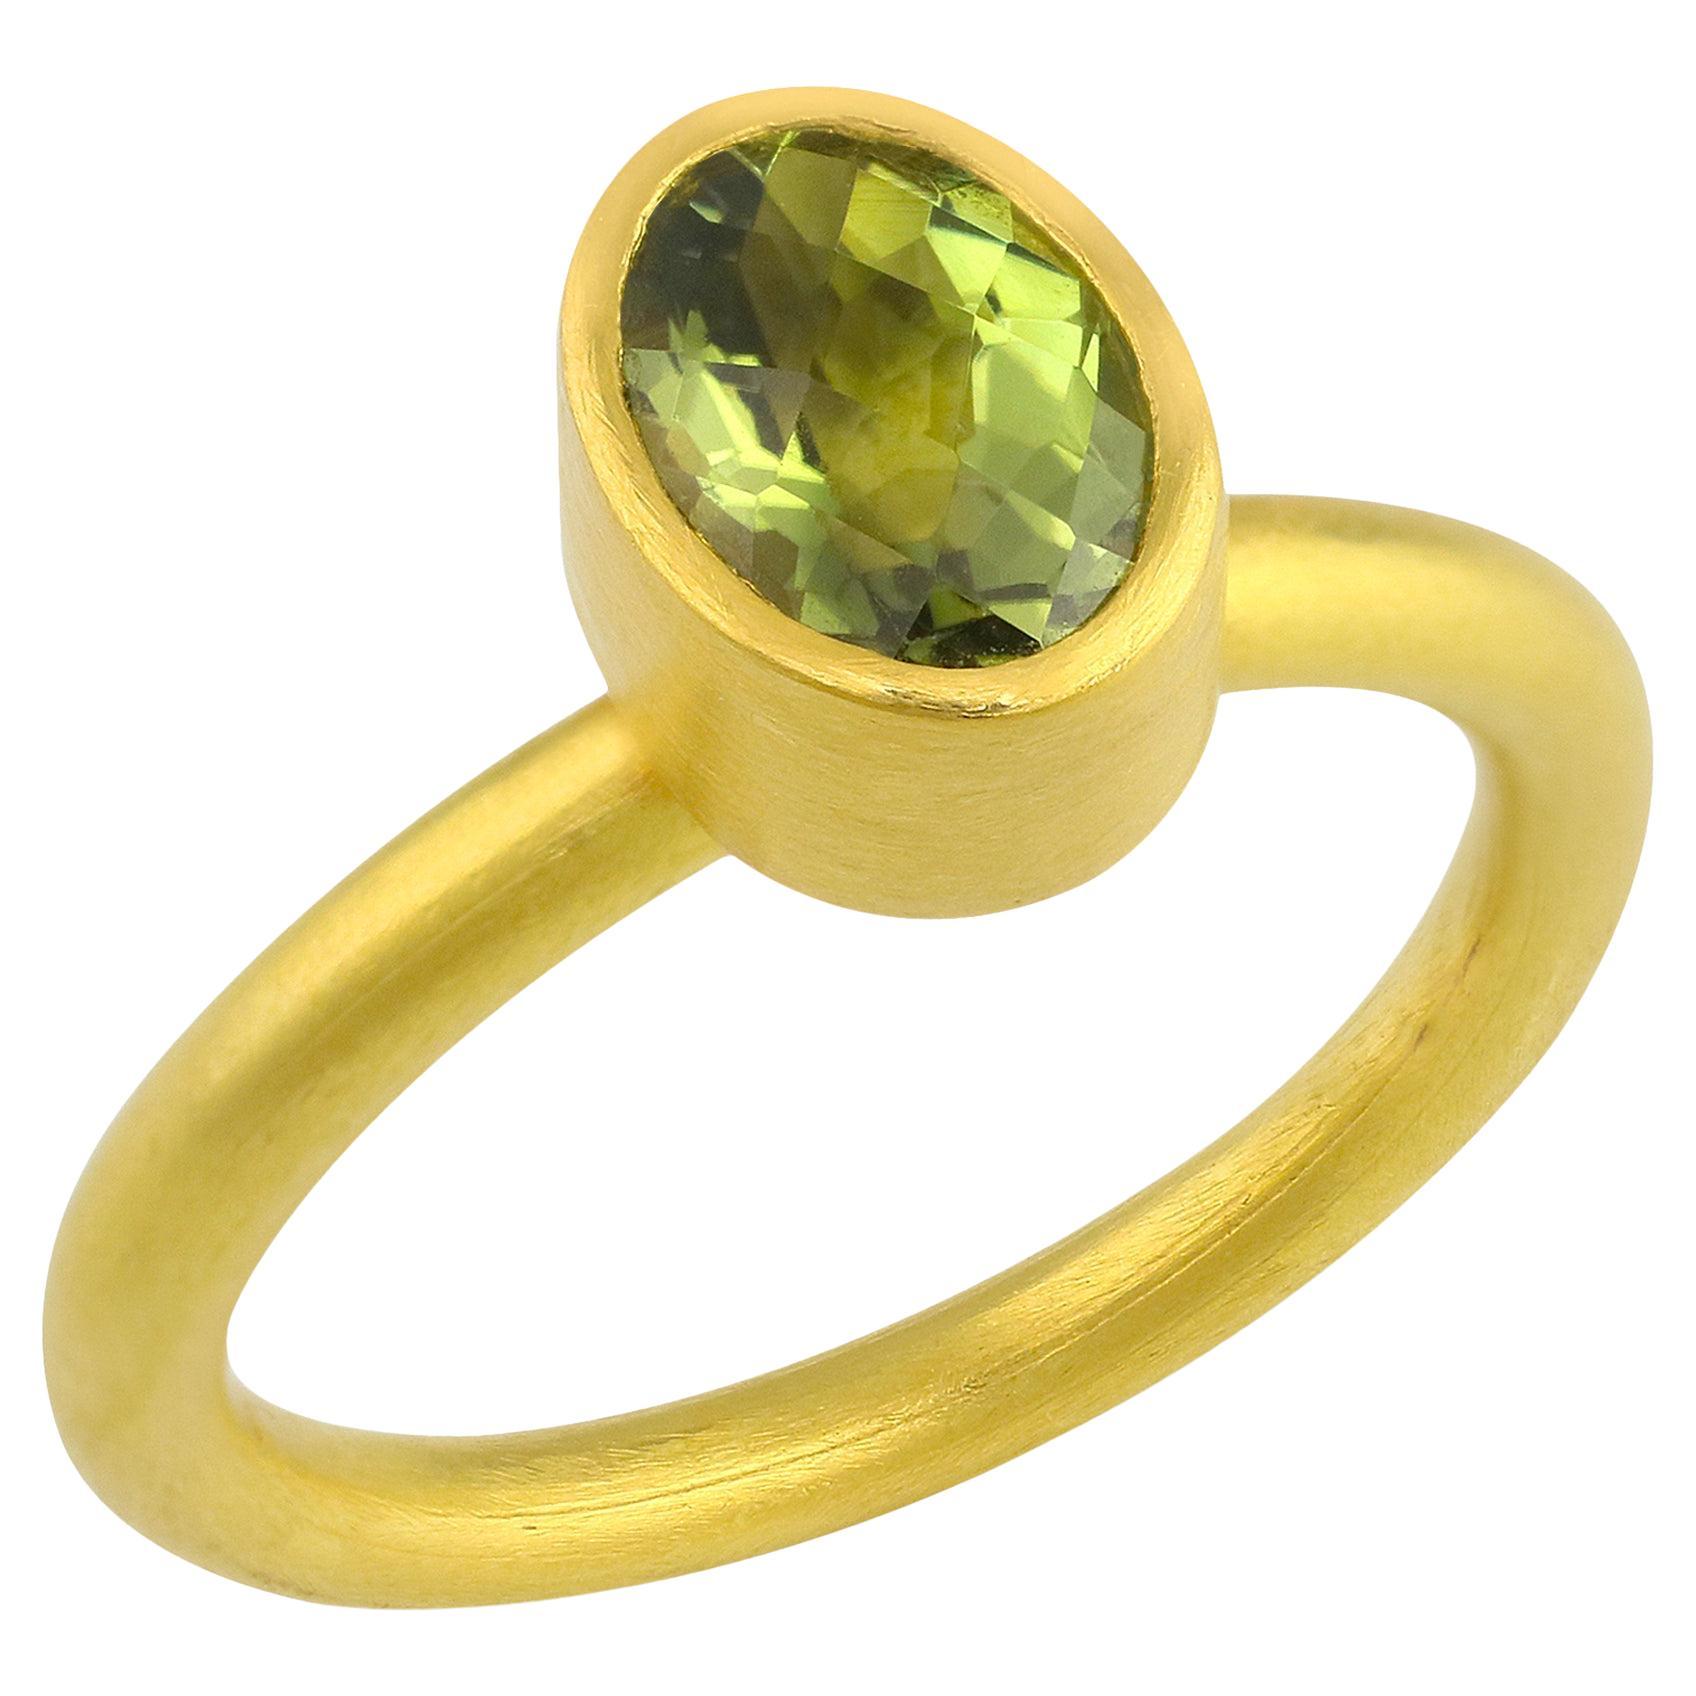 PHILIPPE SPENCER 1.3 Ct. Tourmaline in 22K and 20K Gold Solitaire Ring